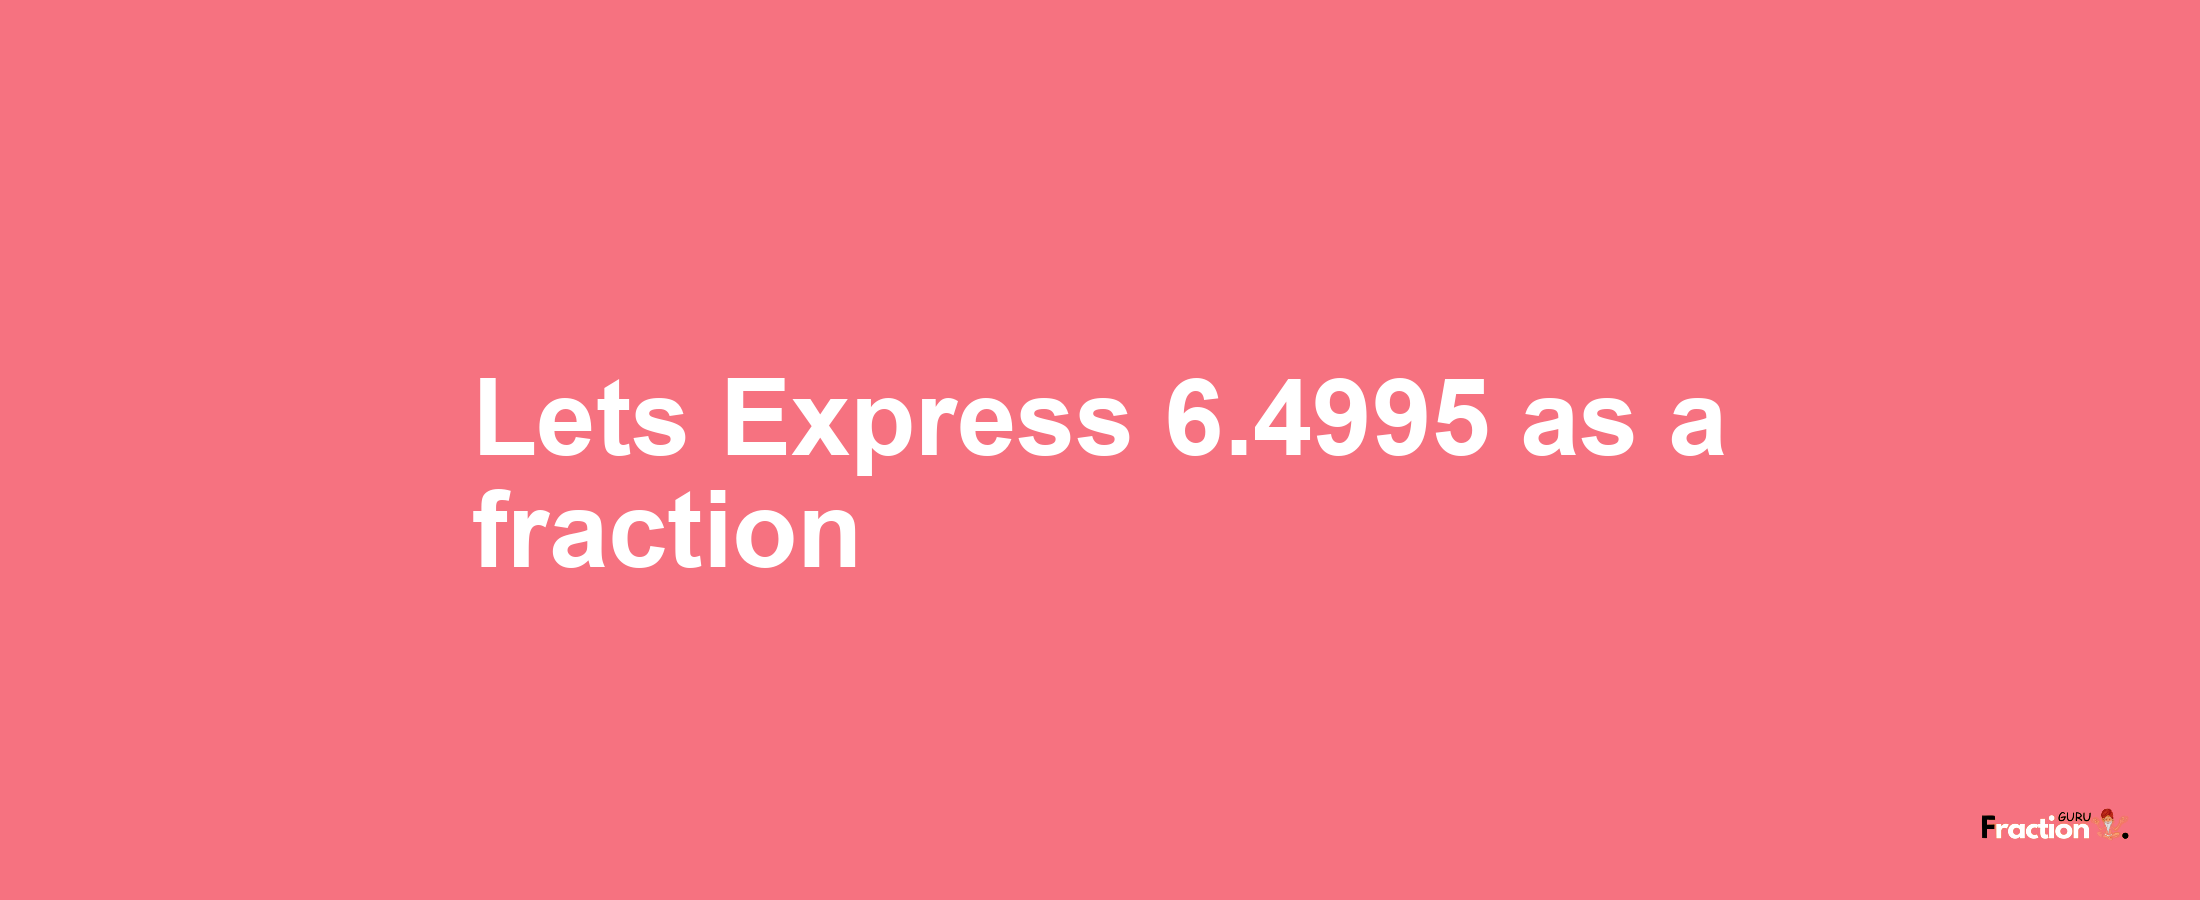 Lets Express 6.4995 as afraction